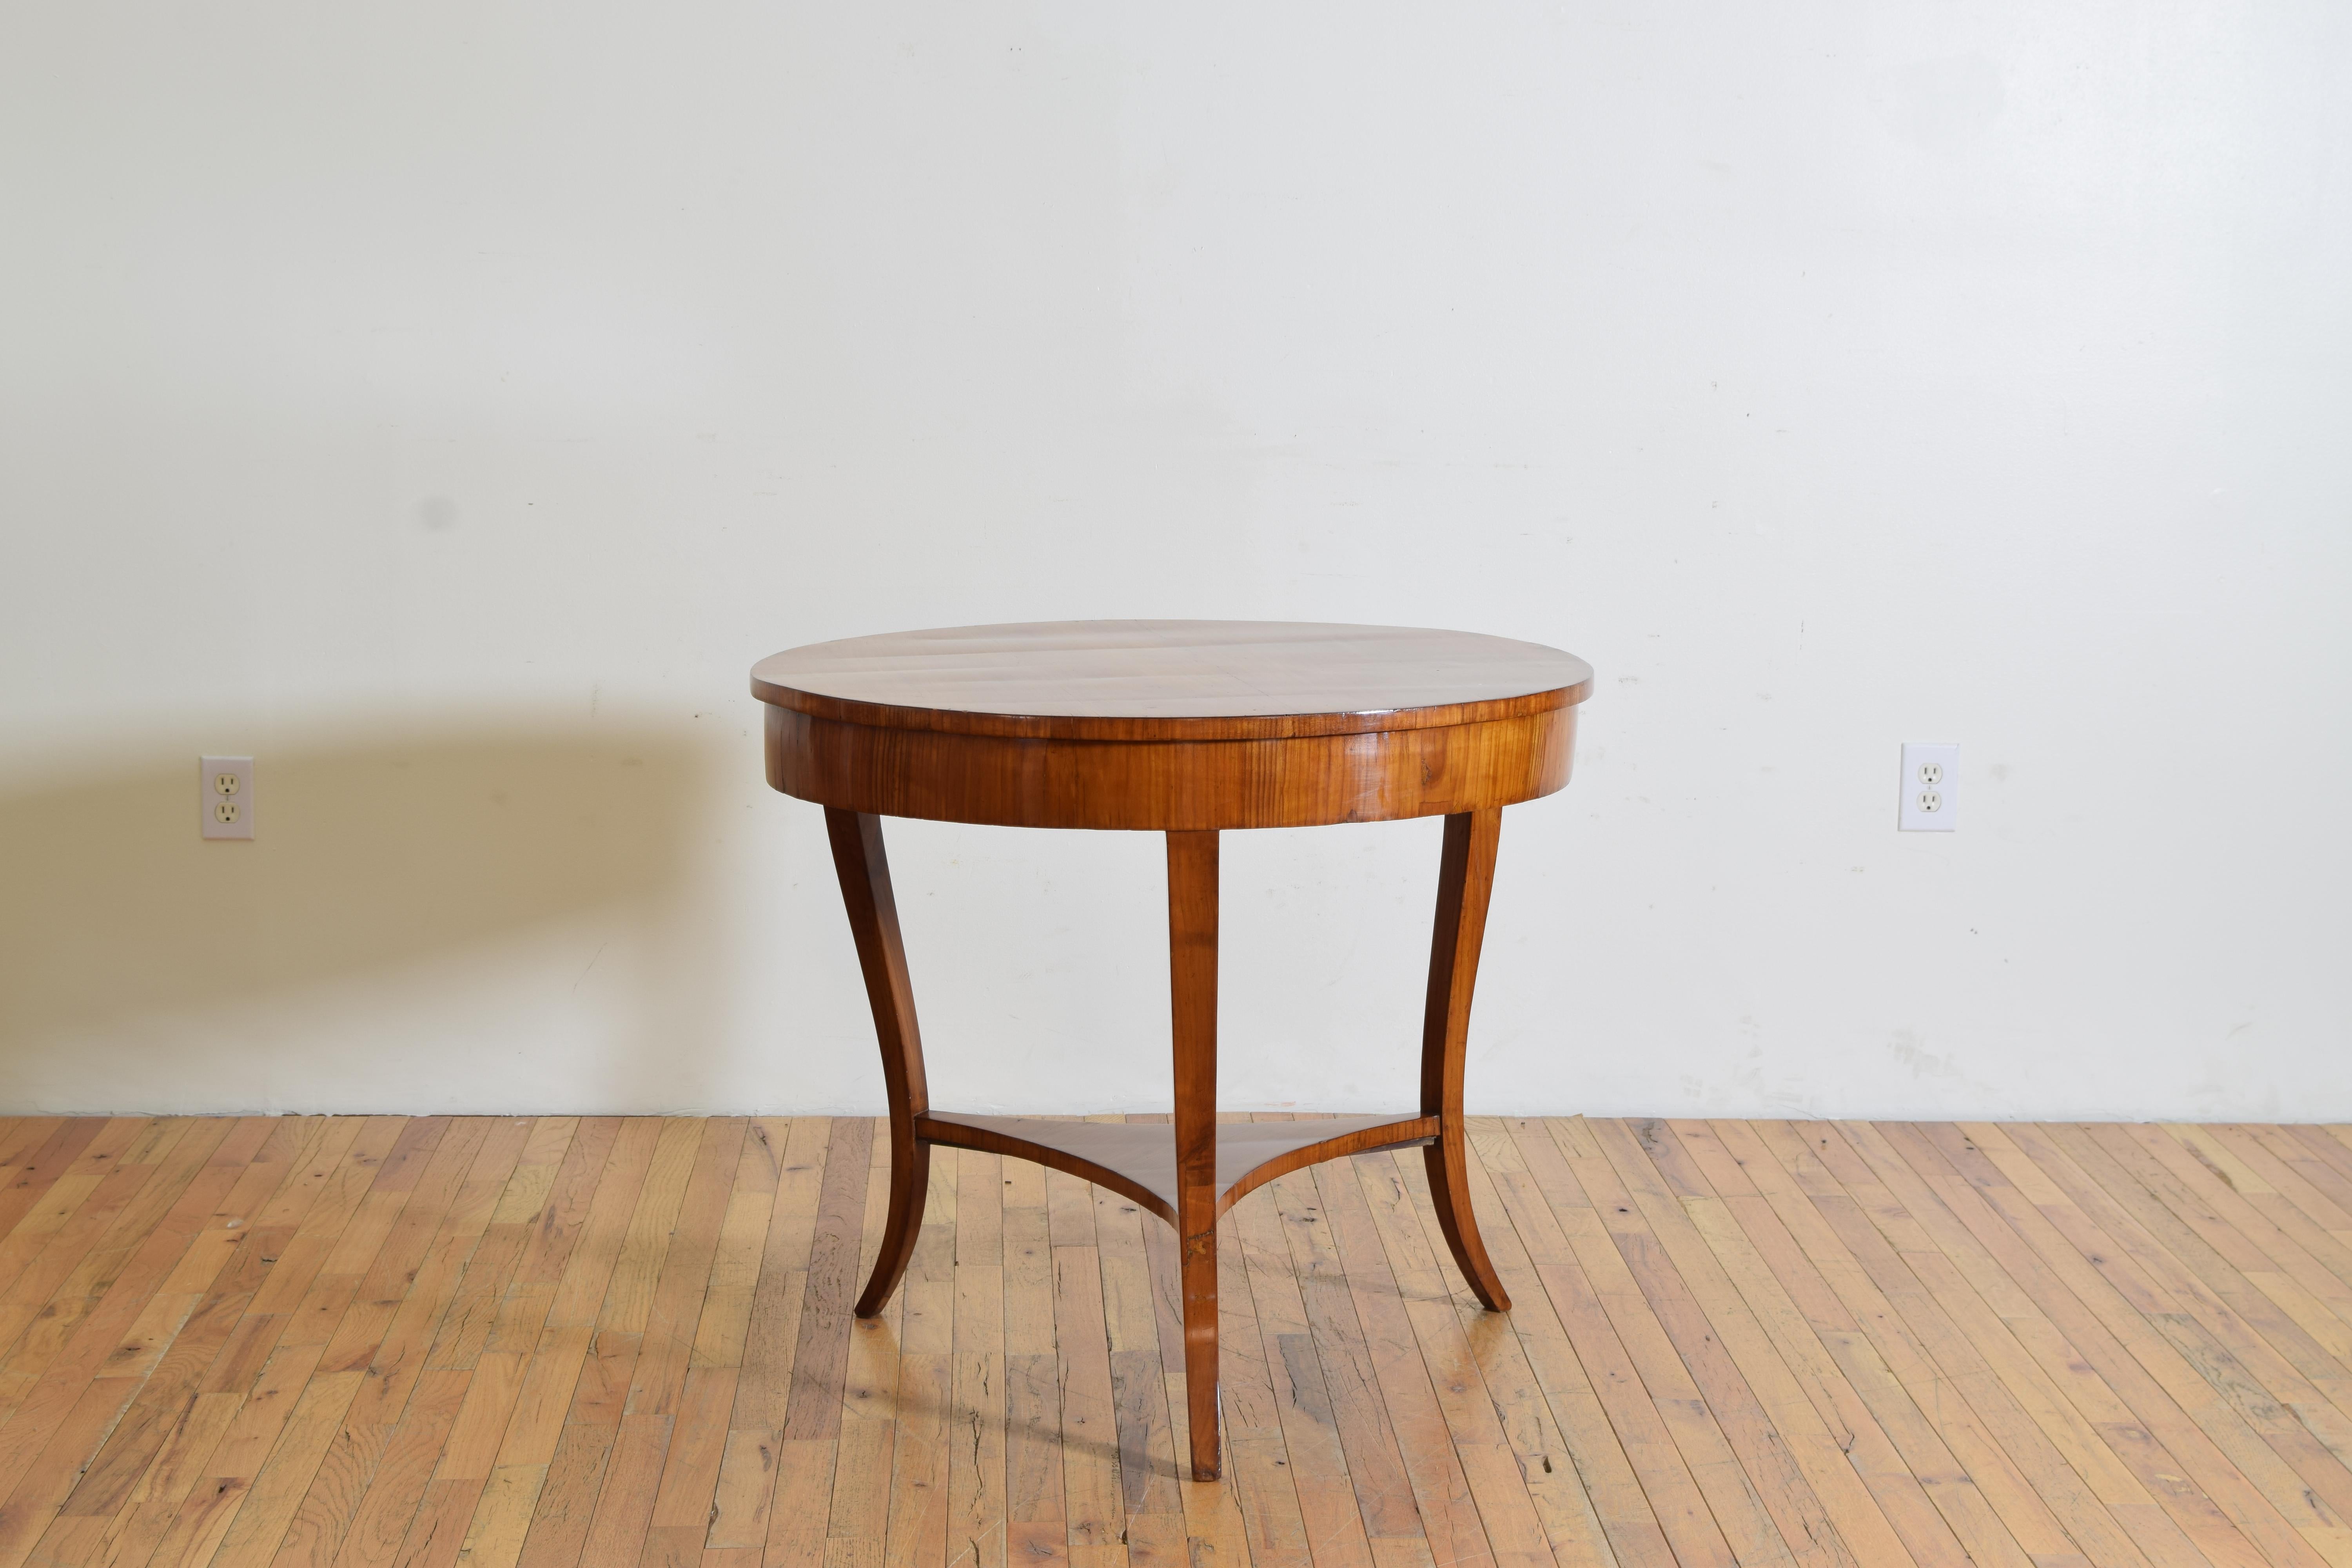 Constructed almost entirely of fruitwood veneers this center table features a round top with substantial apron raised on elegantly shaped cabriole legs joined by a shaped platform stretcher